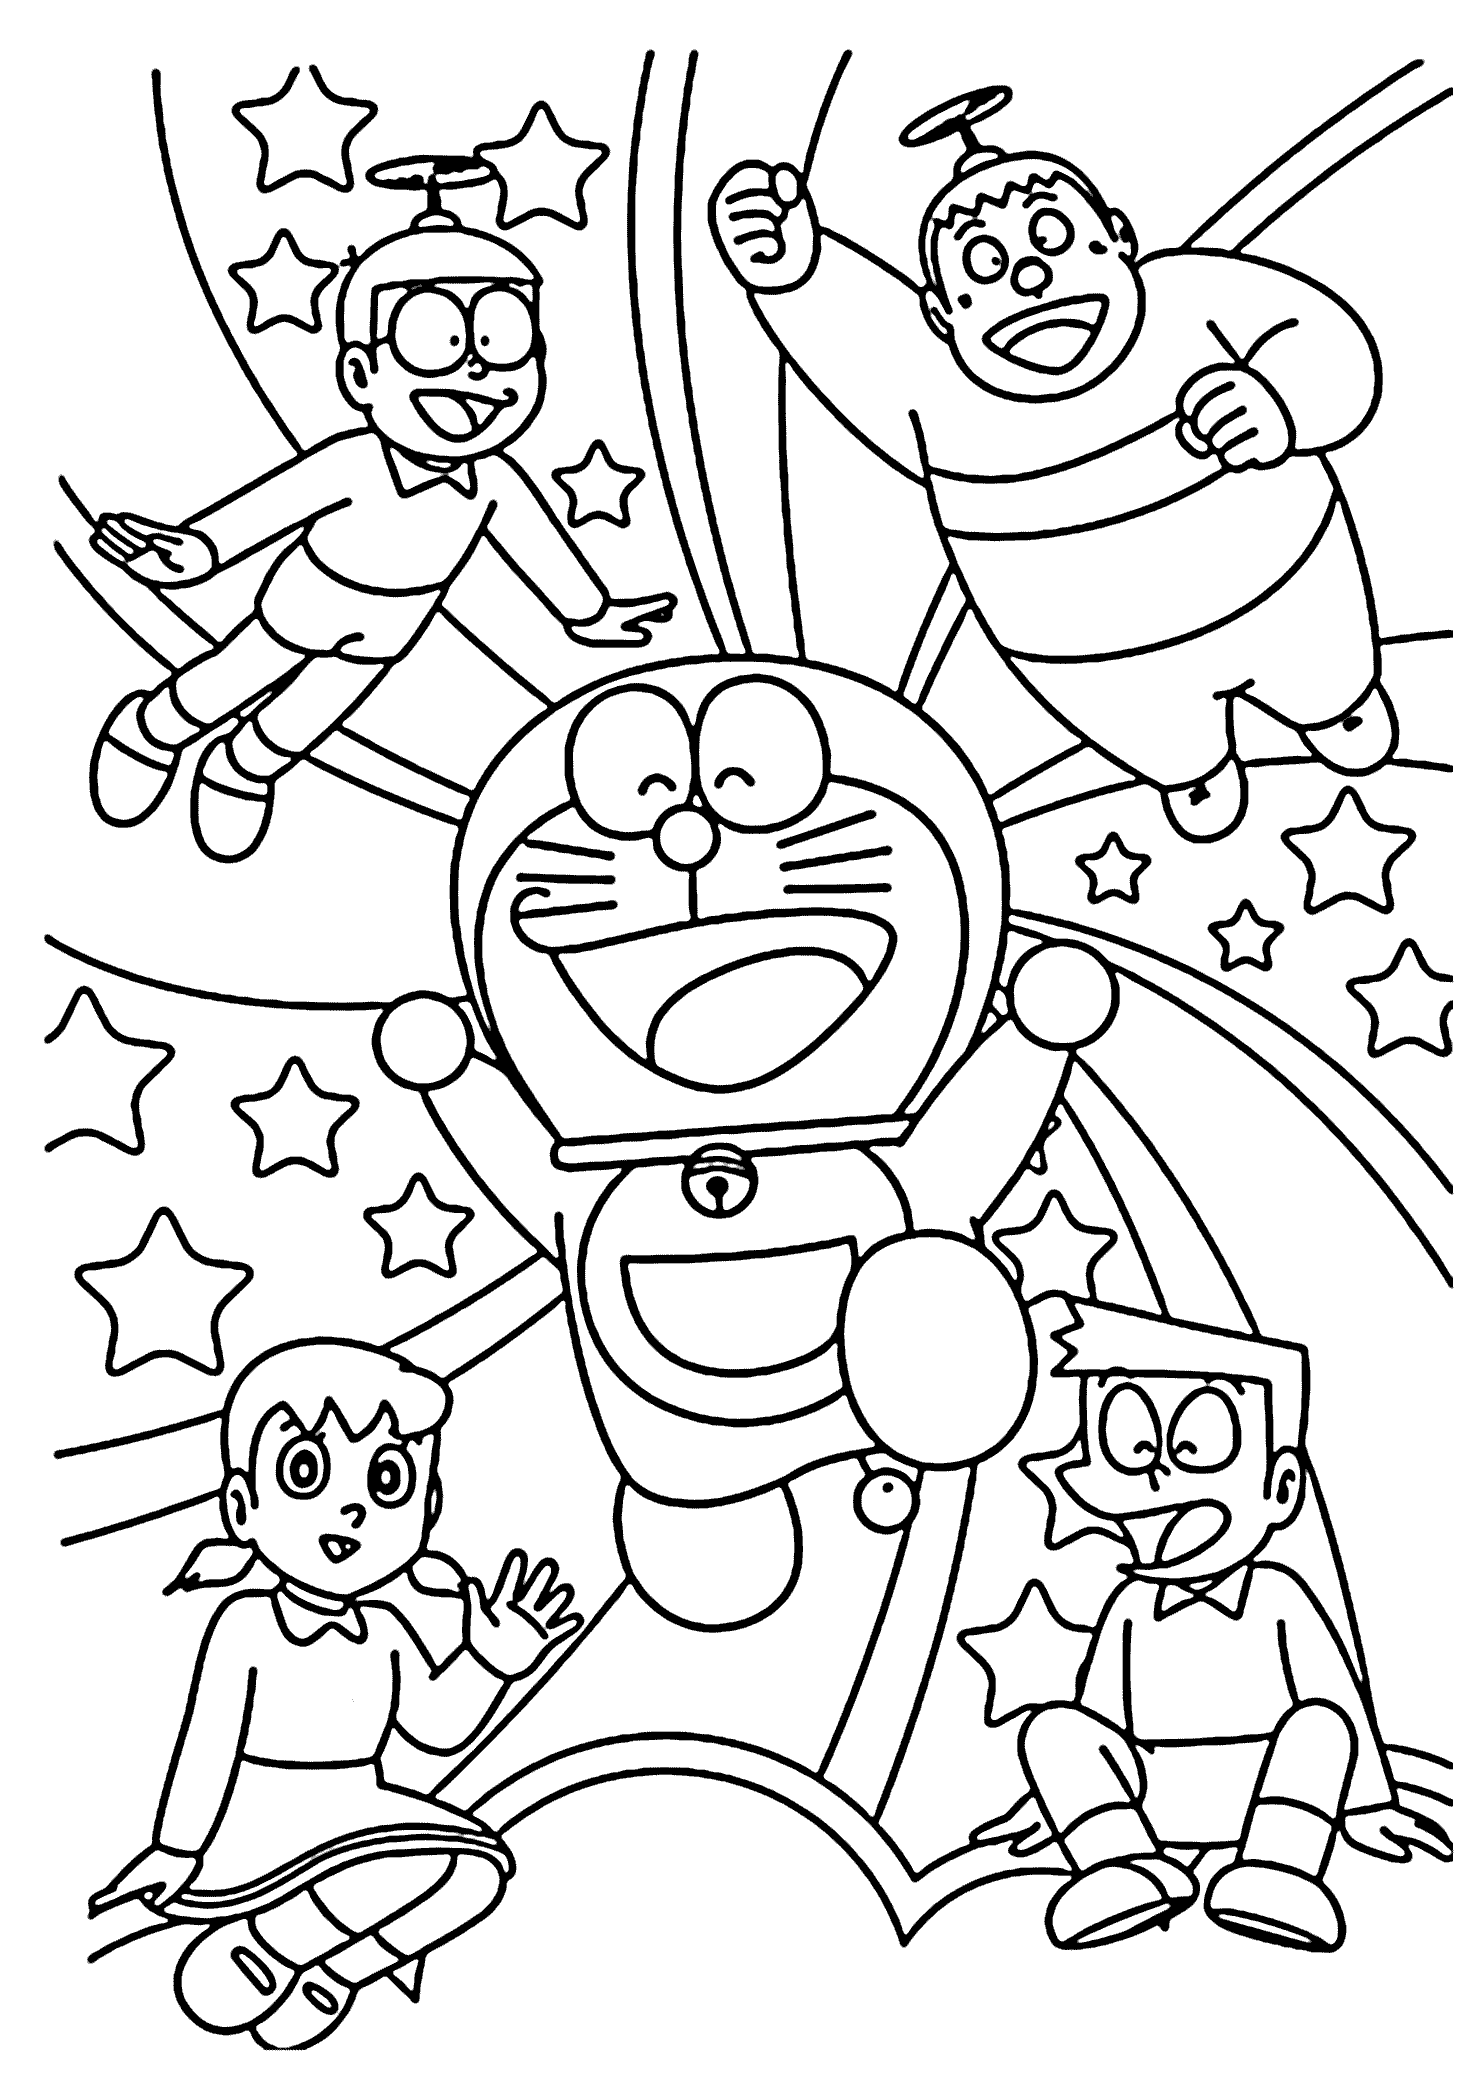 Free Doraemon Coloring Pages, Download Free Doraemon Coloring Pages png